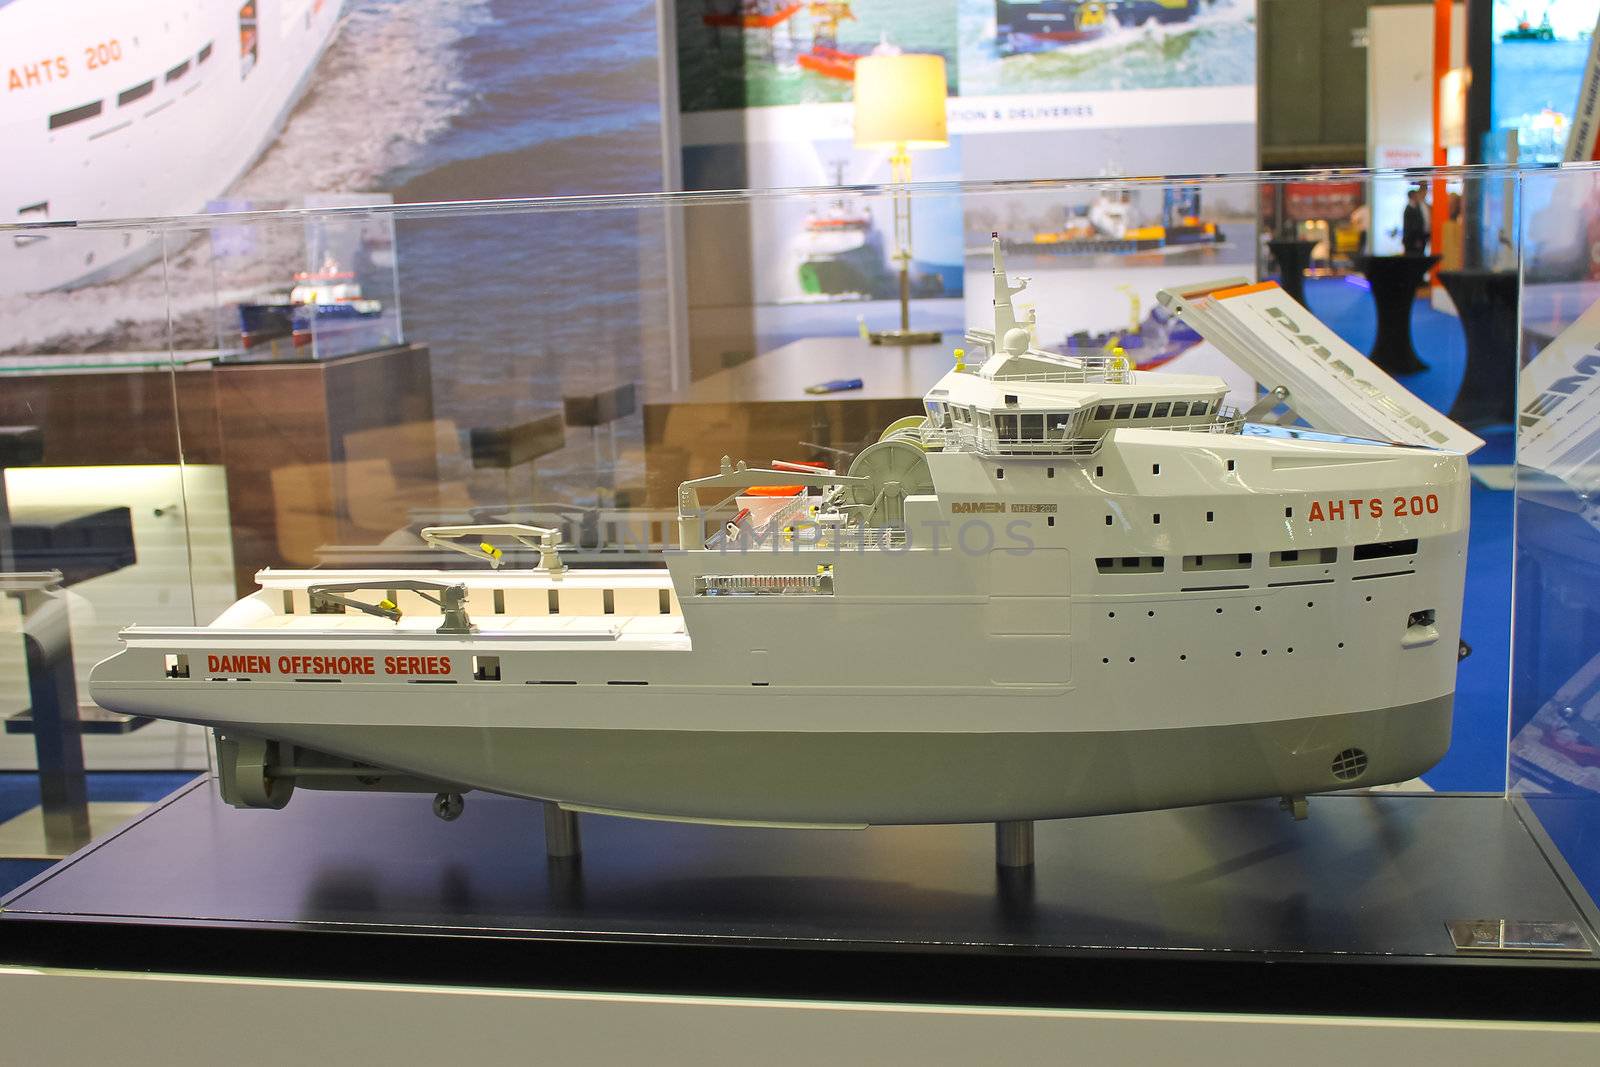 Stand shipbuilding company Damen at the exhibition Offshore Energy 2012. Netherlands